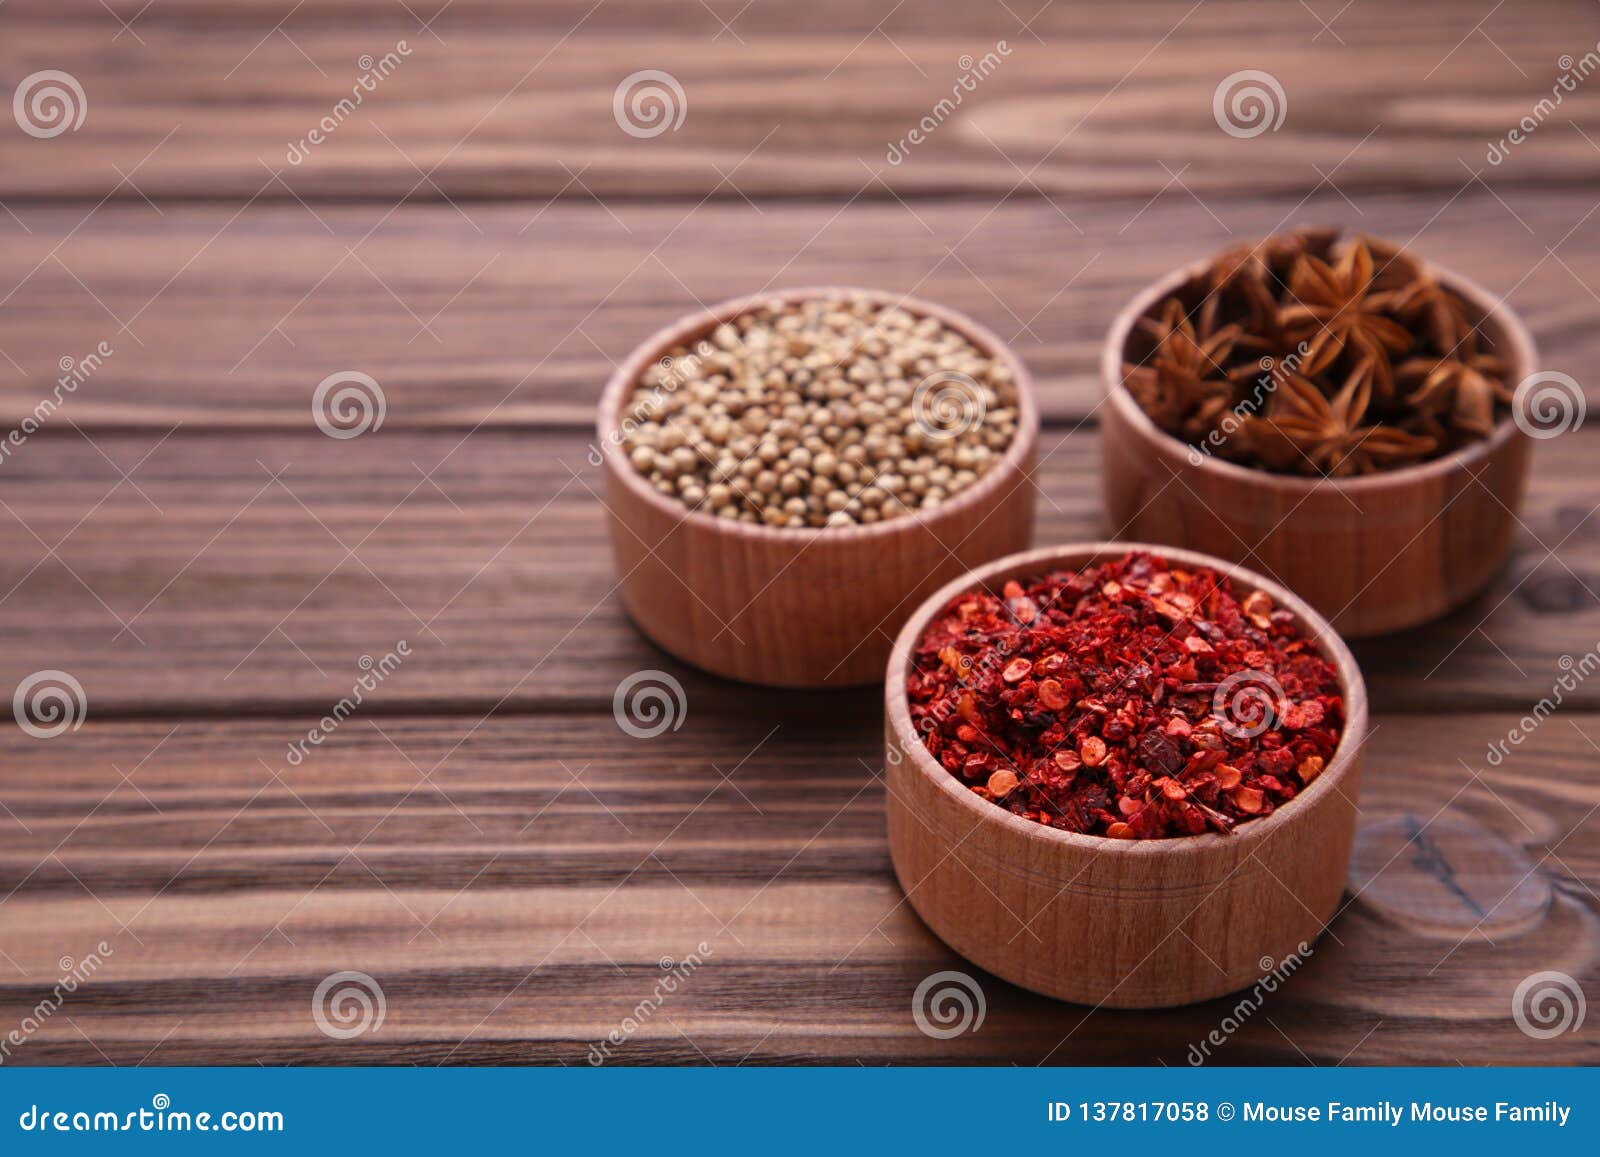 Spices Mix on a Brown Wooden Background. Top View Stock Photo - Image ...